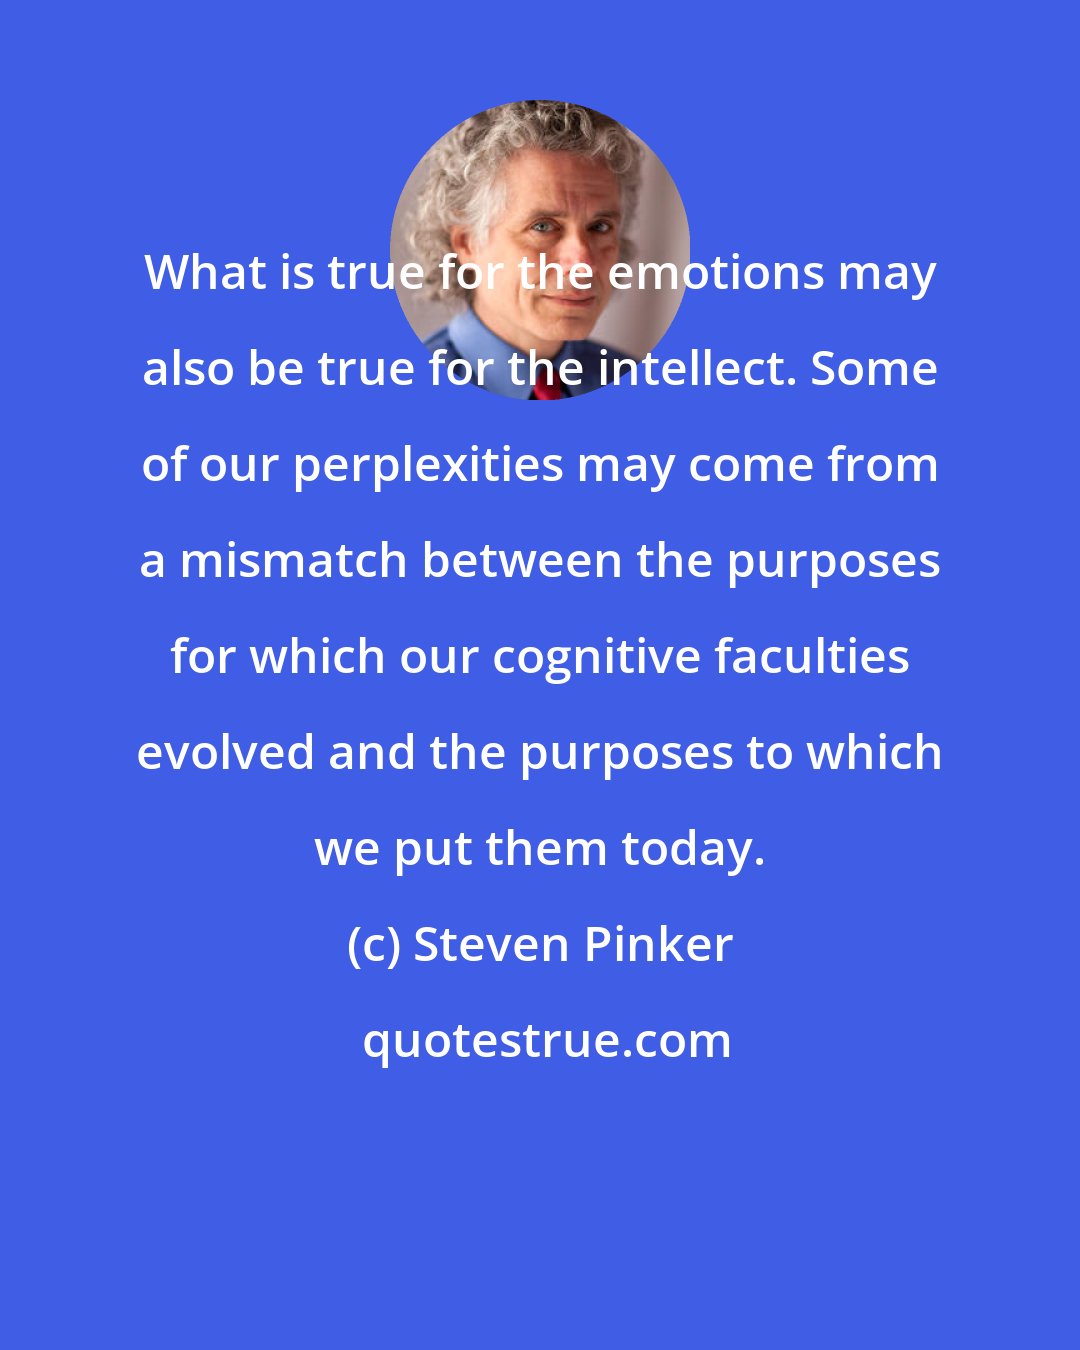 Steven Pinker: What is true for the emotions may also be true for the intellect. Some of our perplexities may come from a mismatch between the purposes for which our cognitive faculties evolved and the purposes to which we put them today.